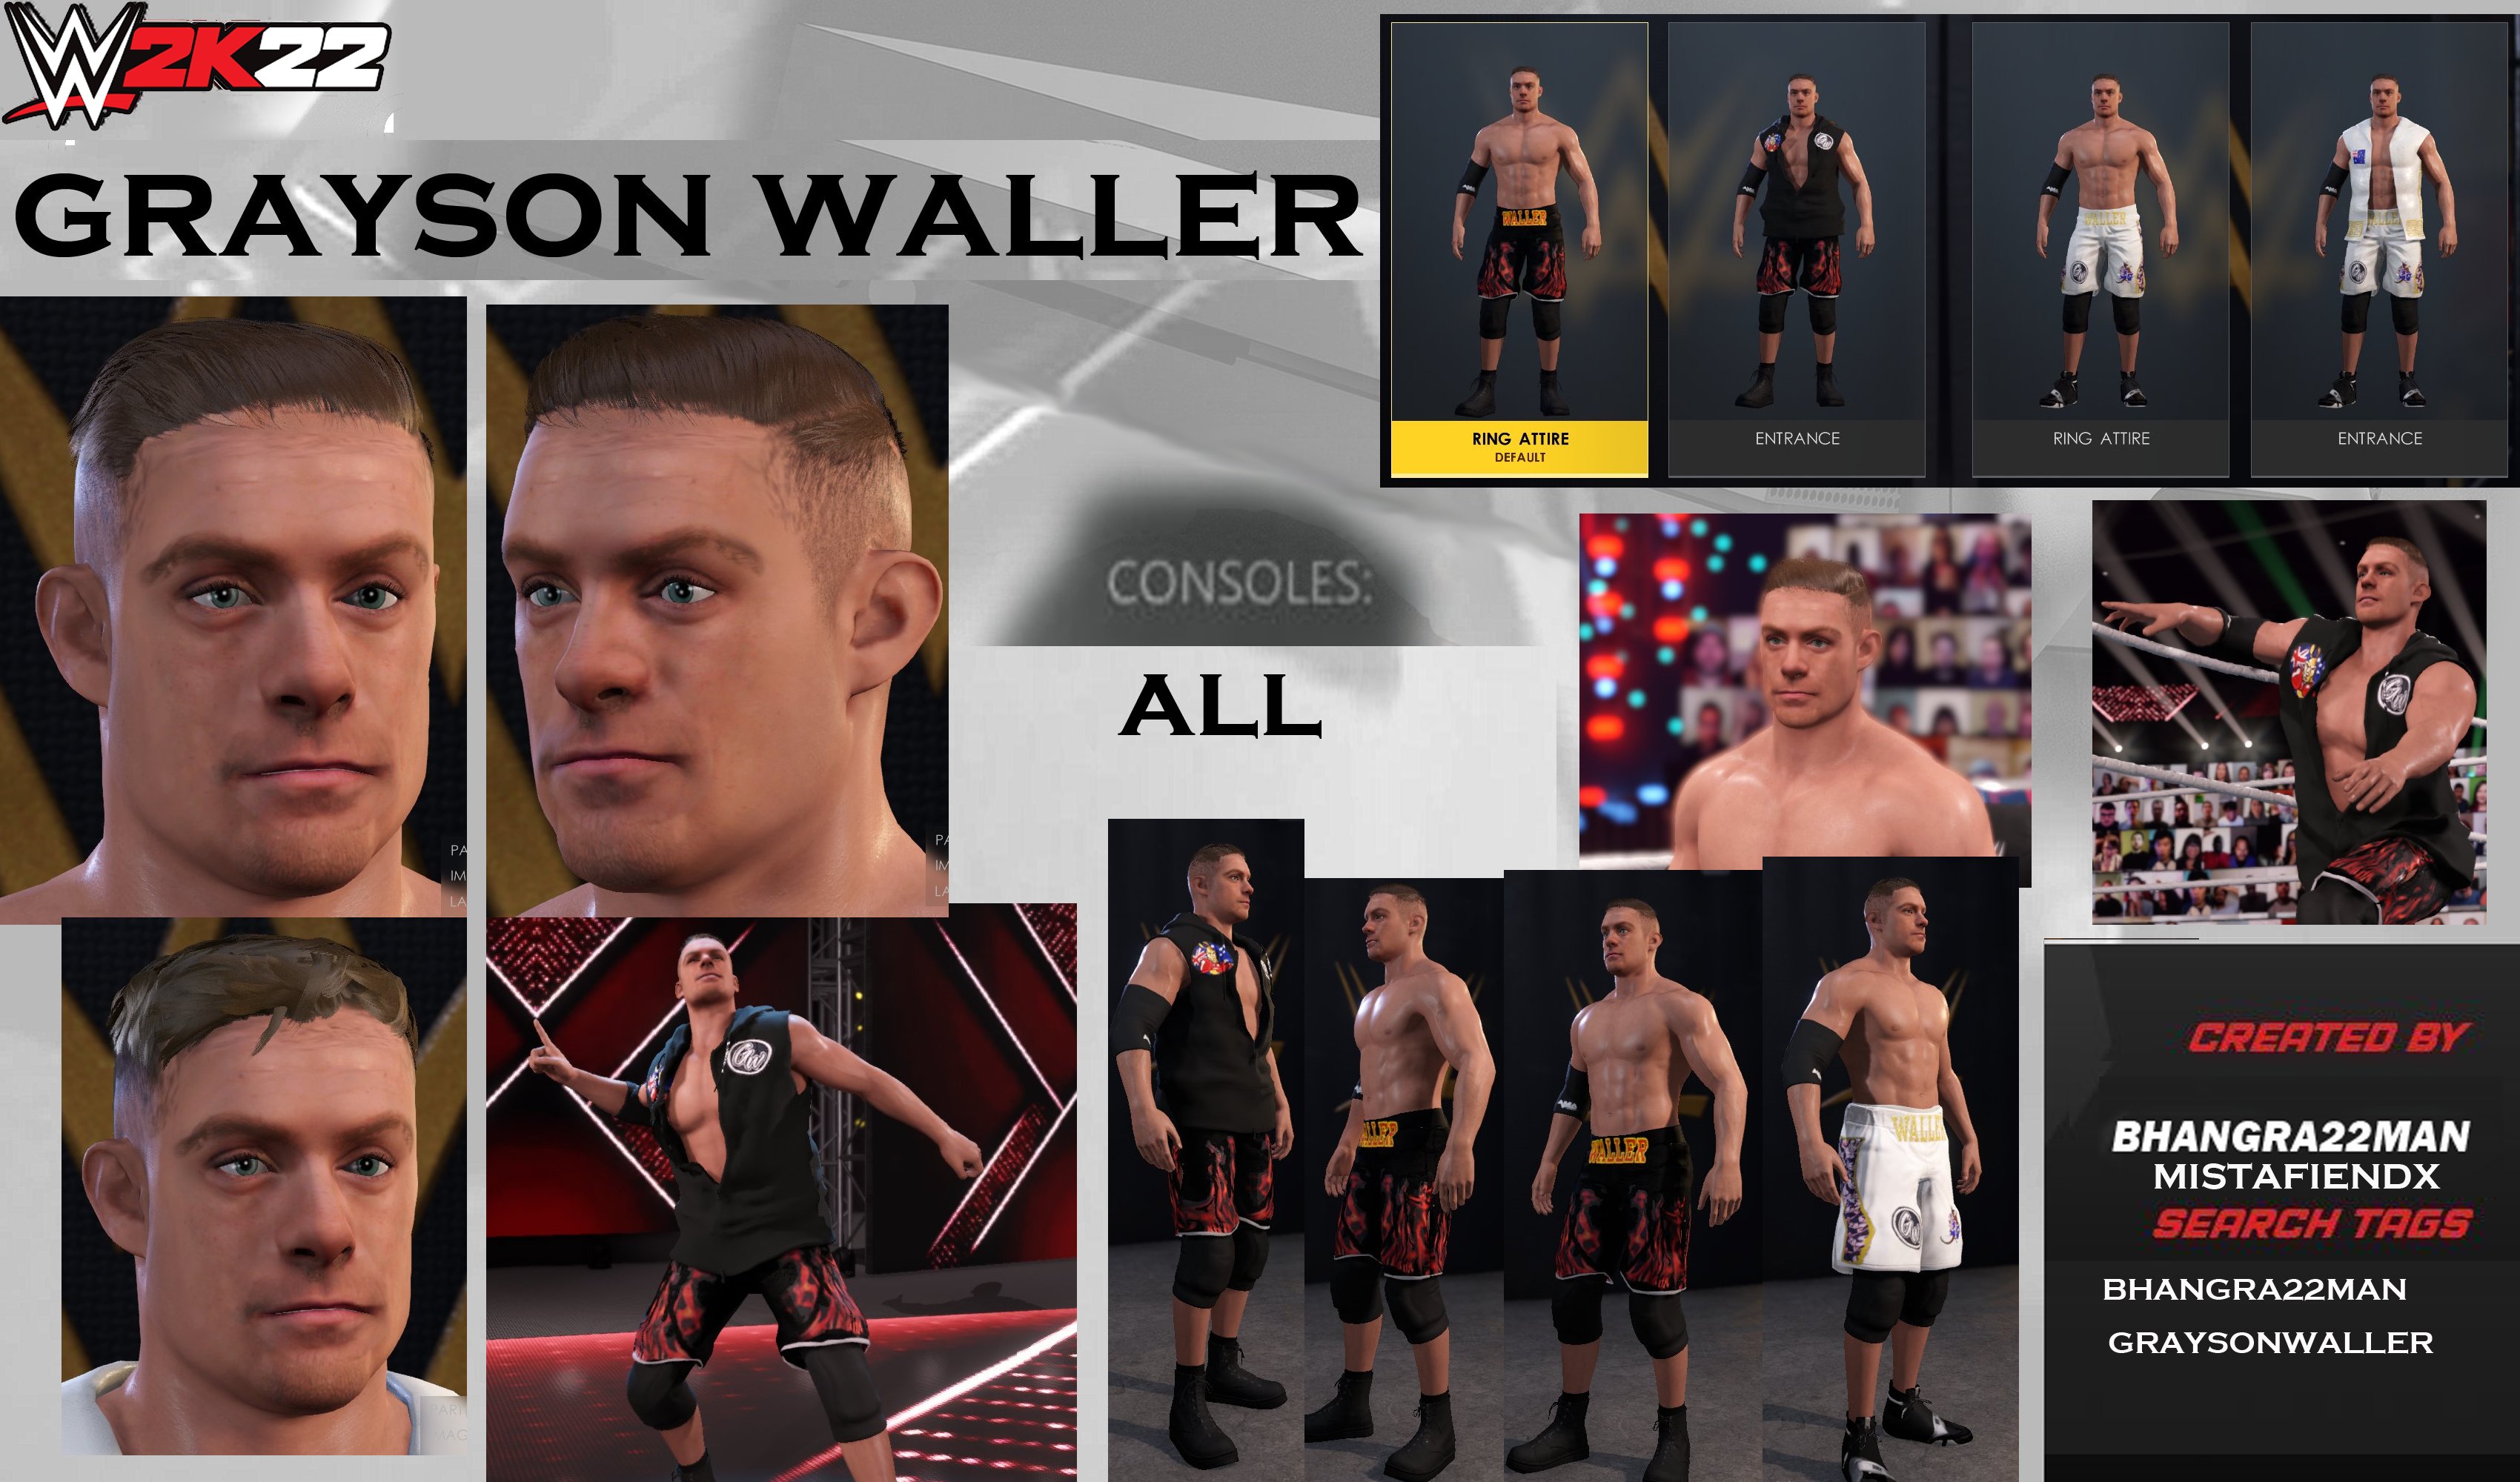 WWE2K23 on X: The full #WWE2K20 roster is live! Who are your